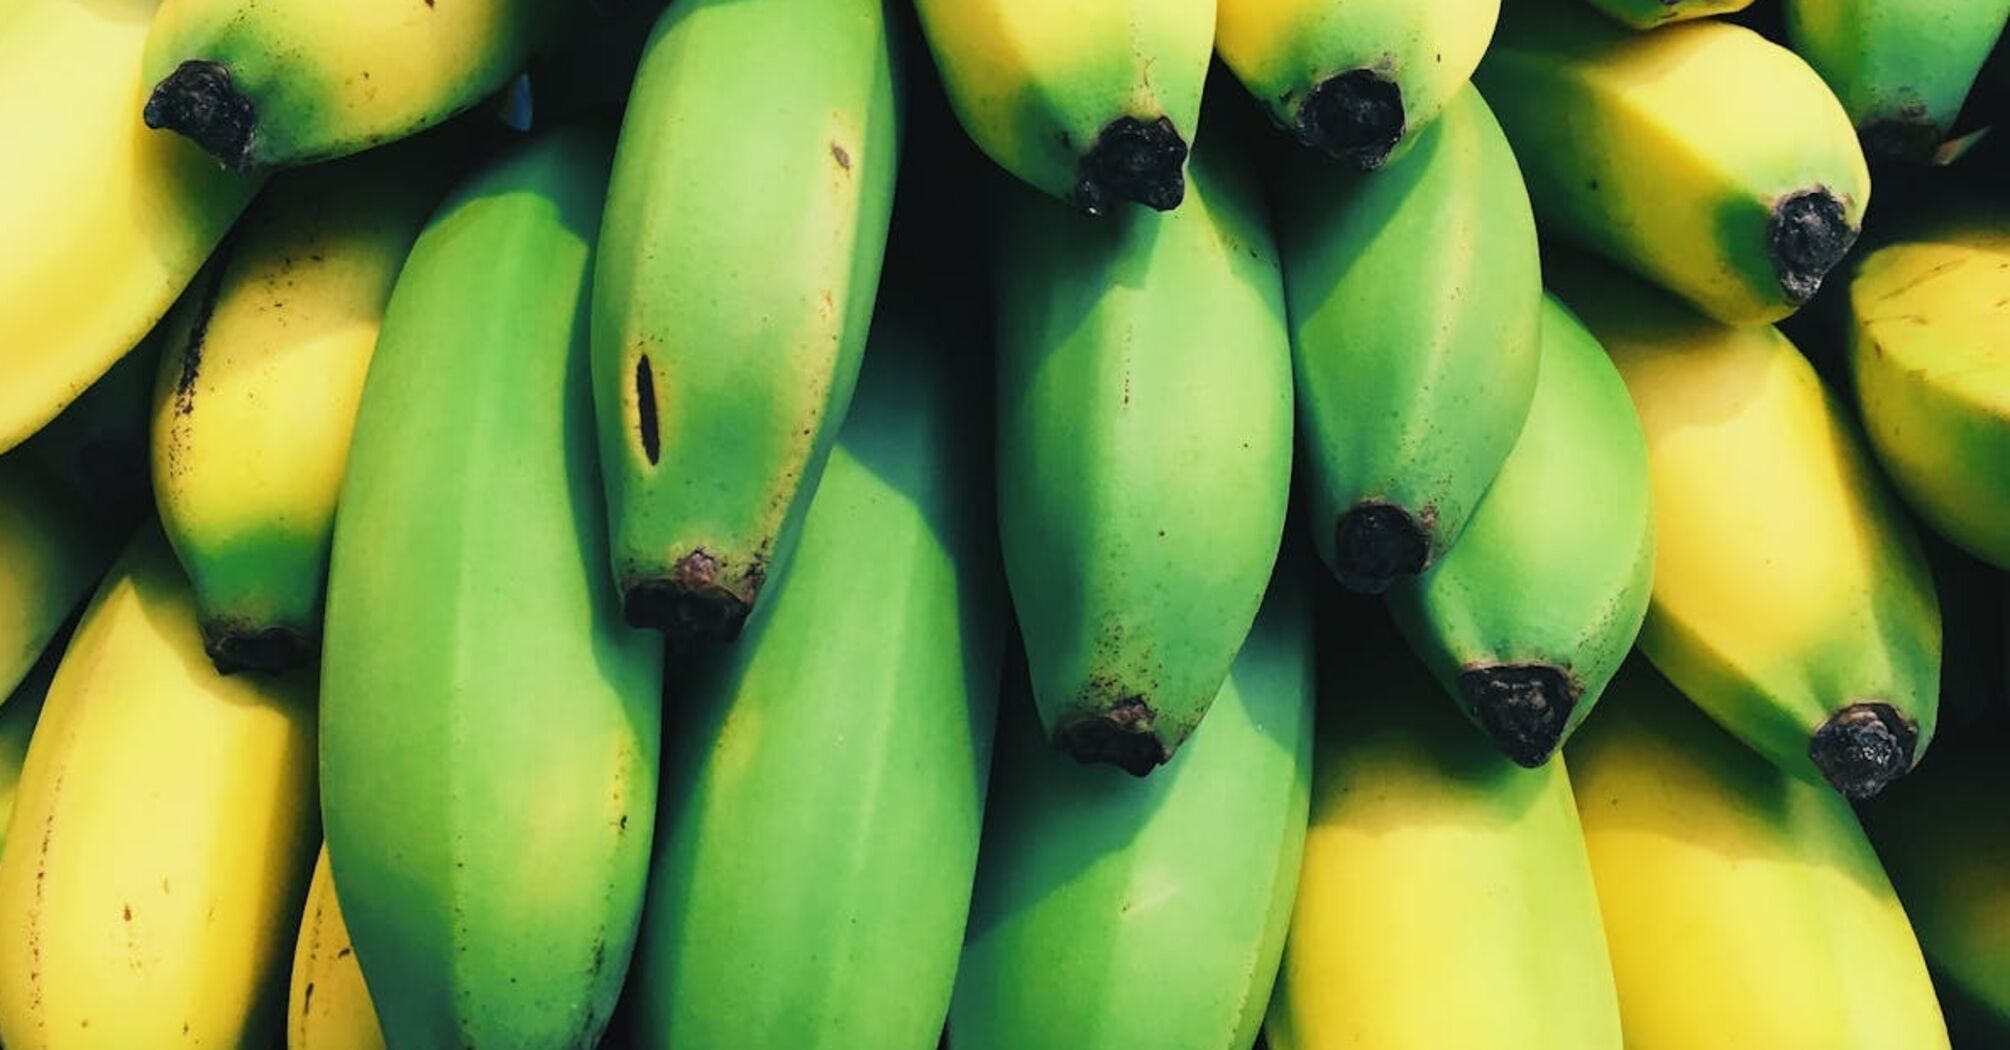 Just not in the refrigerator: experts named 4 ways to keep bananas fresh for a long time